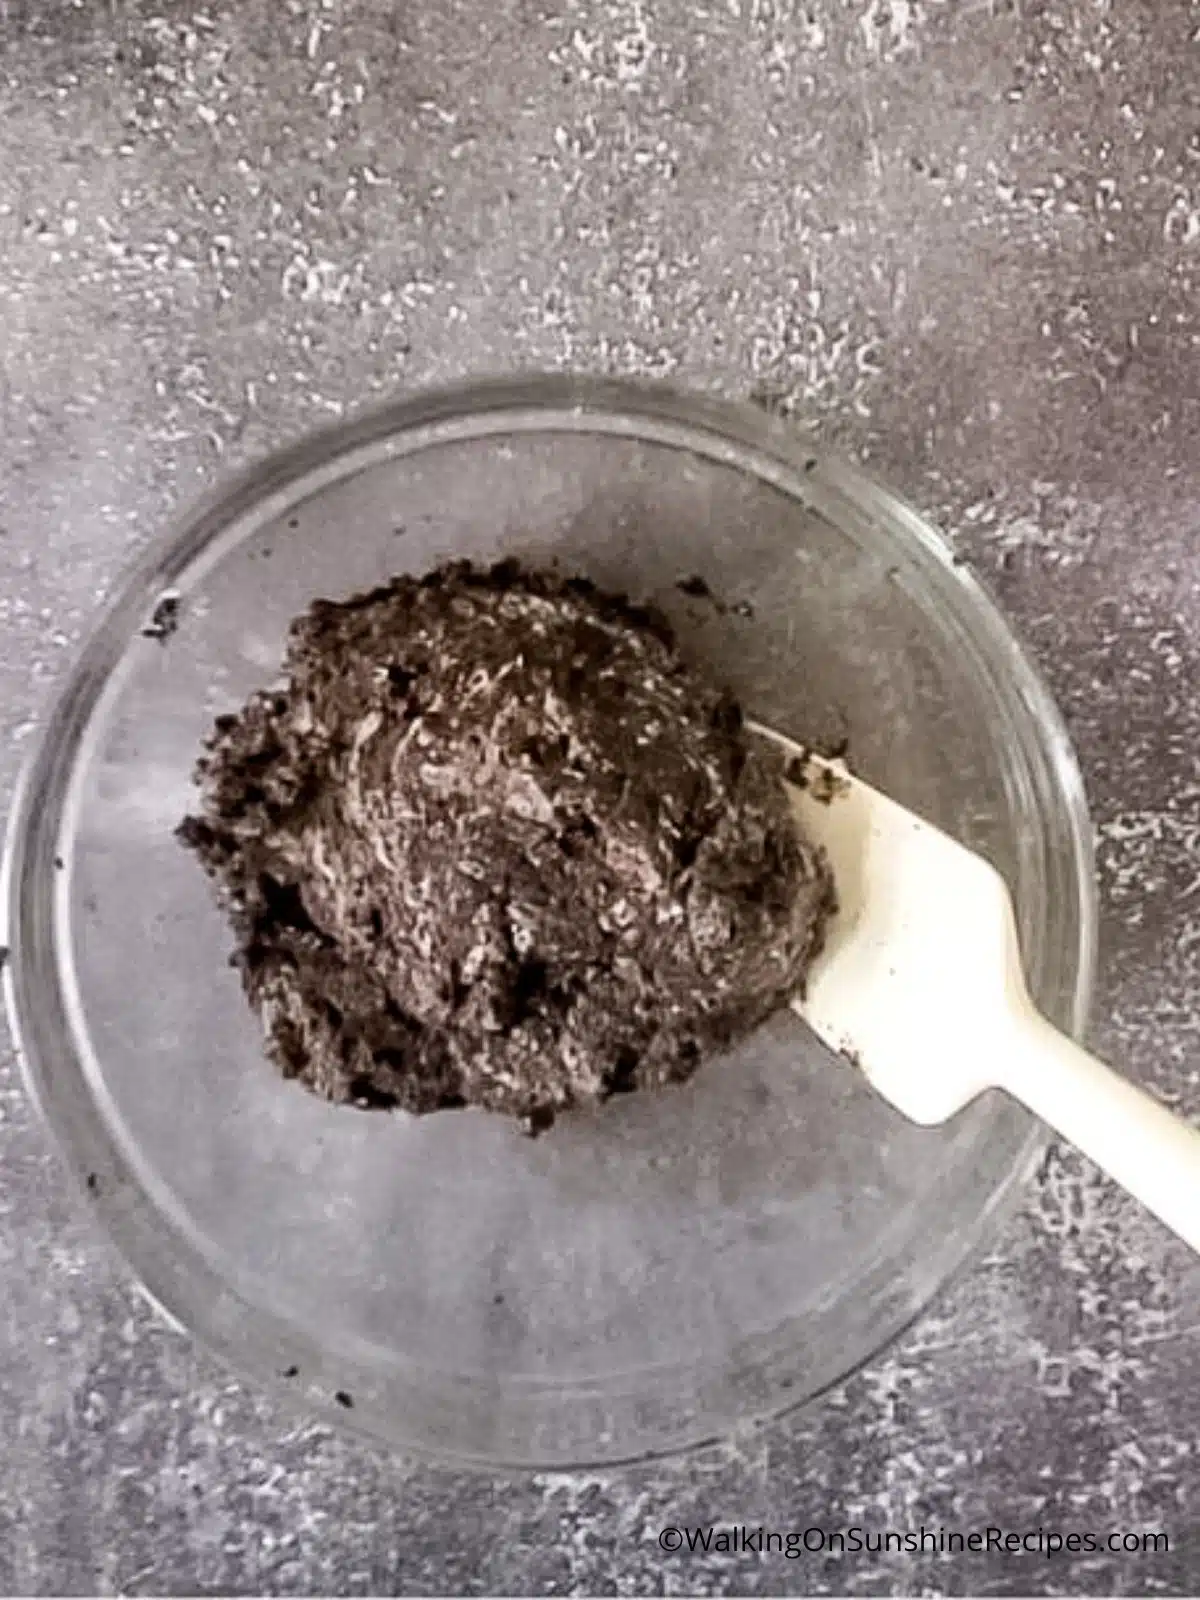 truffle mixture combined in bowl.